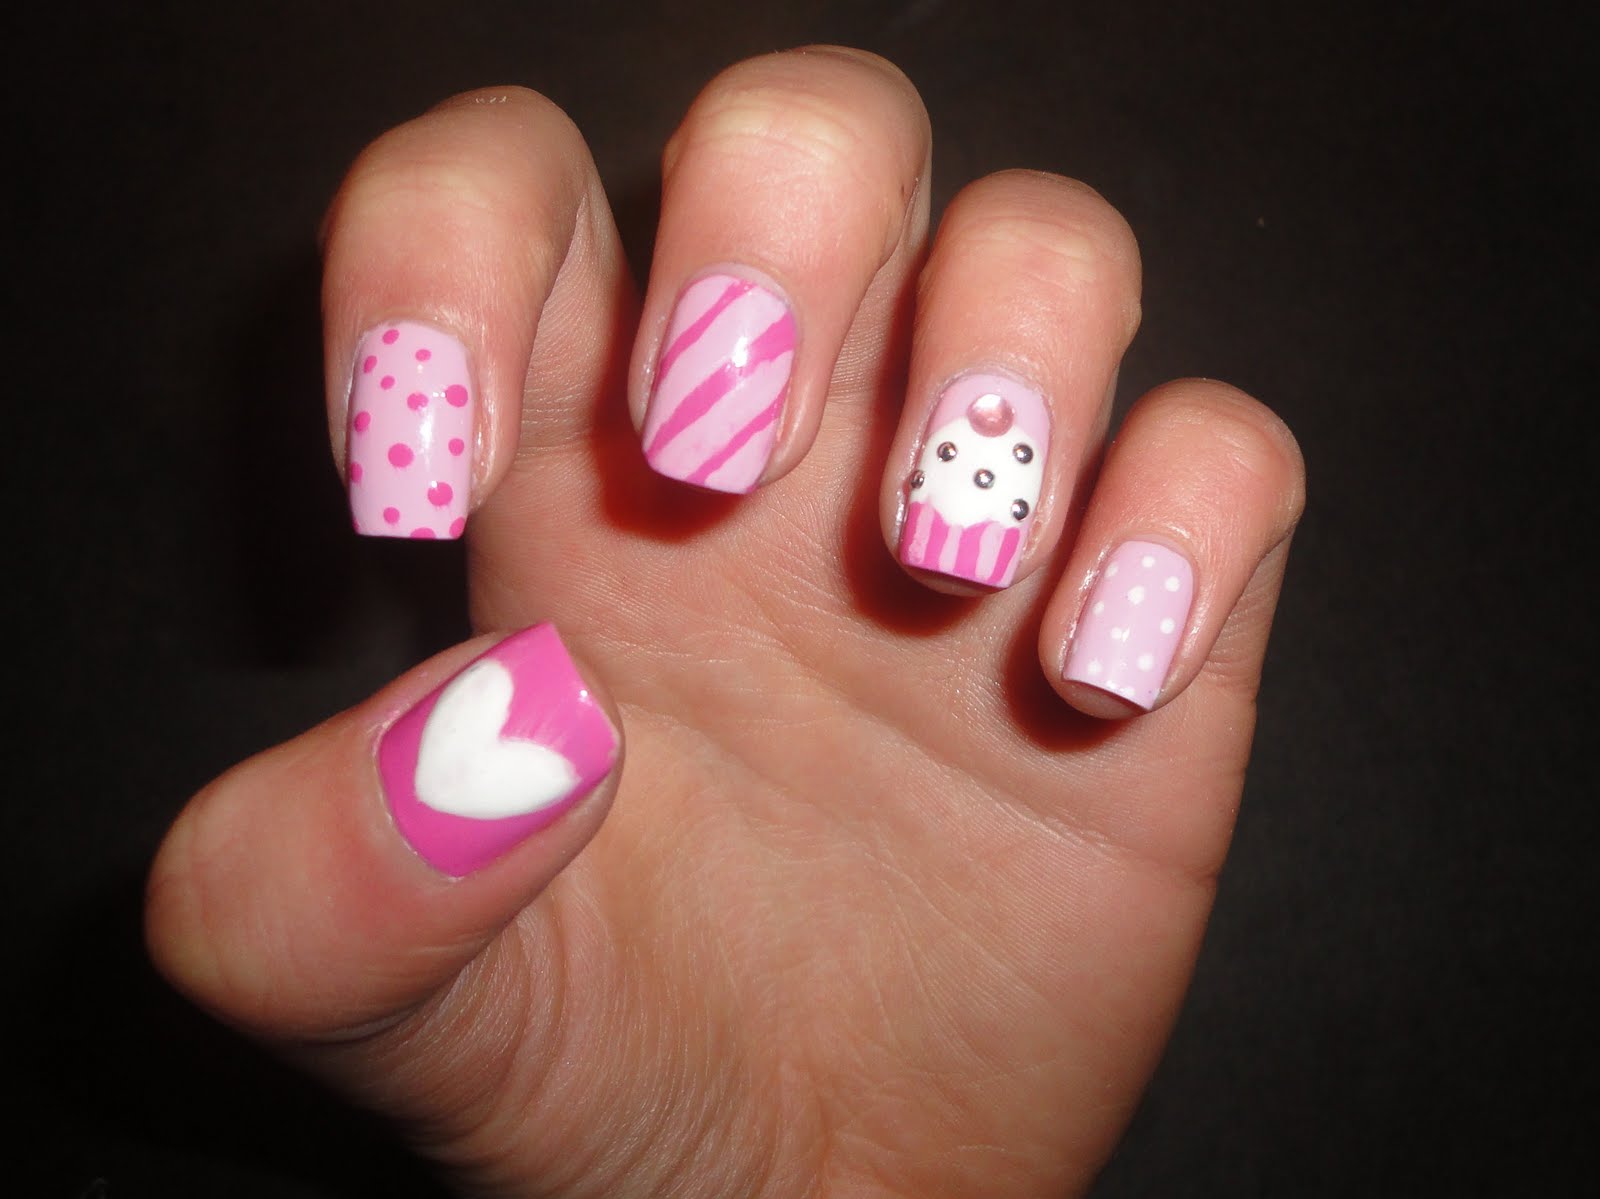 2. Cute and Easy Nail Designs - wide 2